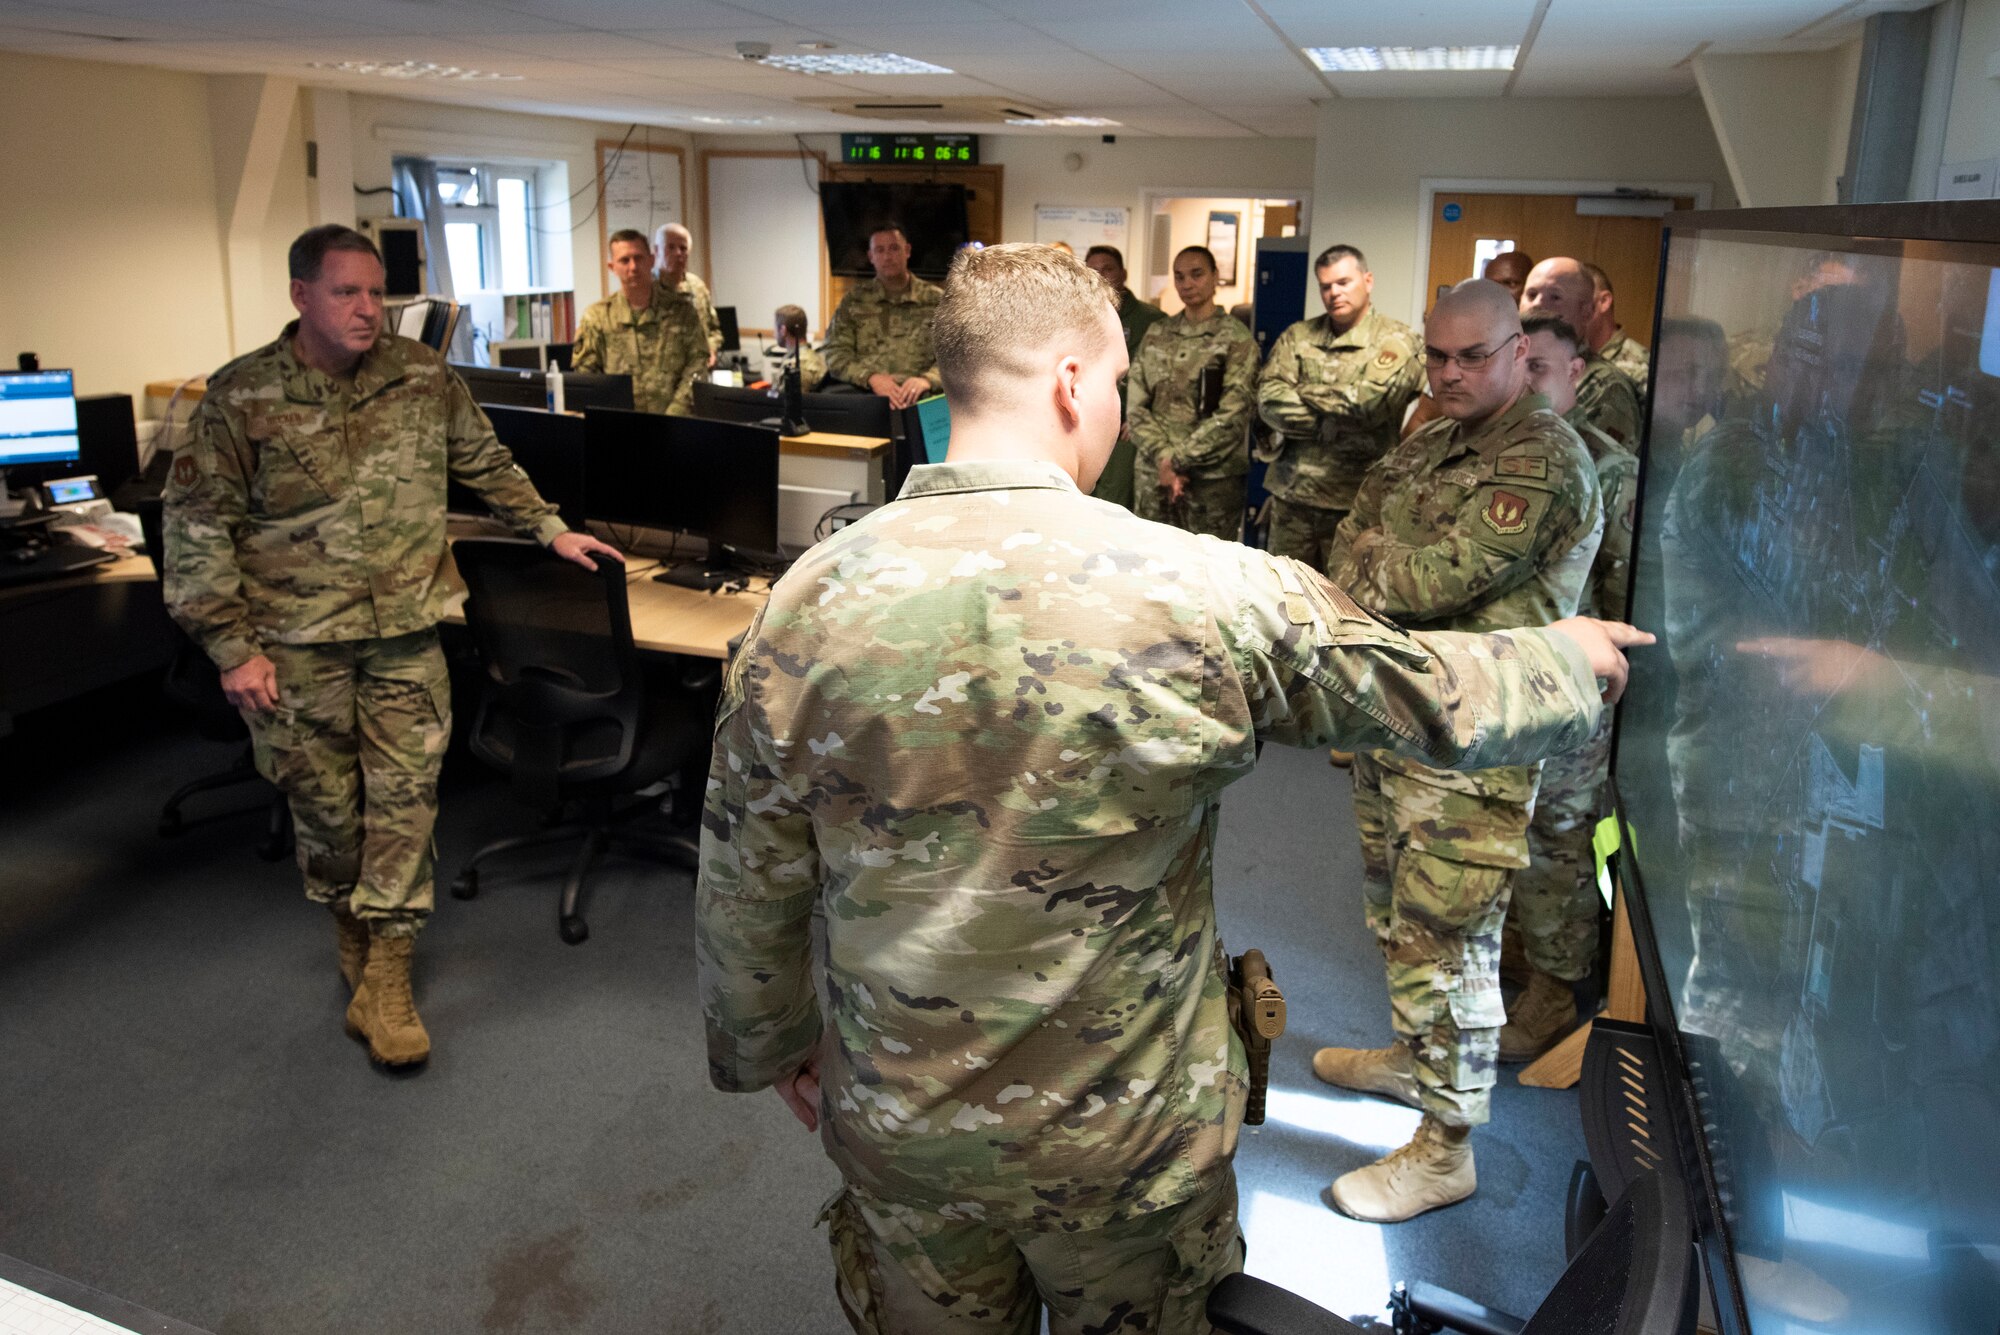 U.S. Air Force Staff Sgt. Bryson Carte, right, 420th Air Base Squadron security forces base defense operations center controller, briefs Gen. James B. Hecker, left, U.S. Air Forces in Europe and Air Forces Africa commander, about base security at Royal Air Force Fairford, England, July, 18, 2022. During his first visit to the 501st Combat Support Wing as the USAFE-AFAFRICA commander, Hecker met with several Airmen and received briefings about the wing’s mission and capabilities. (U.S. Air Force photo by Senior Airman Jennifer Zima)